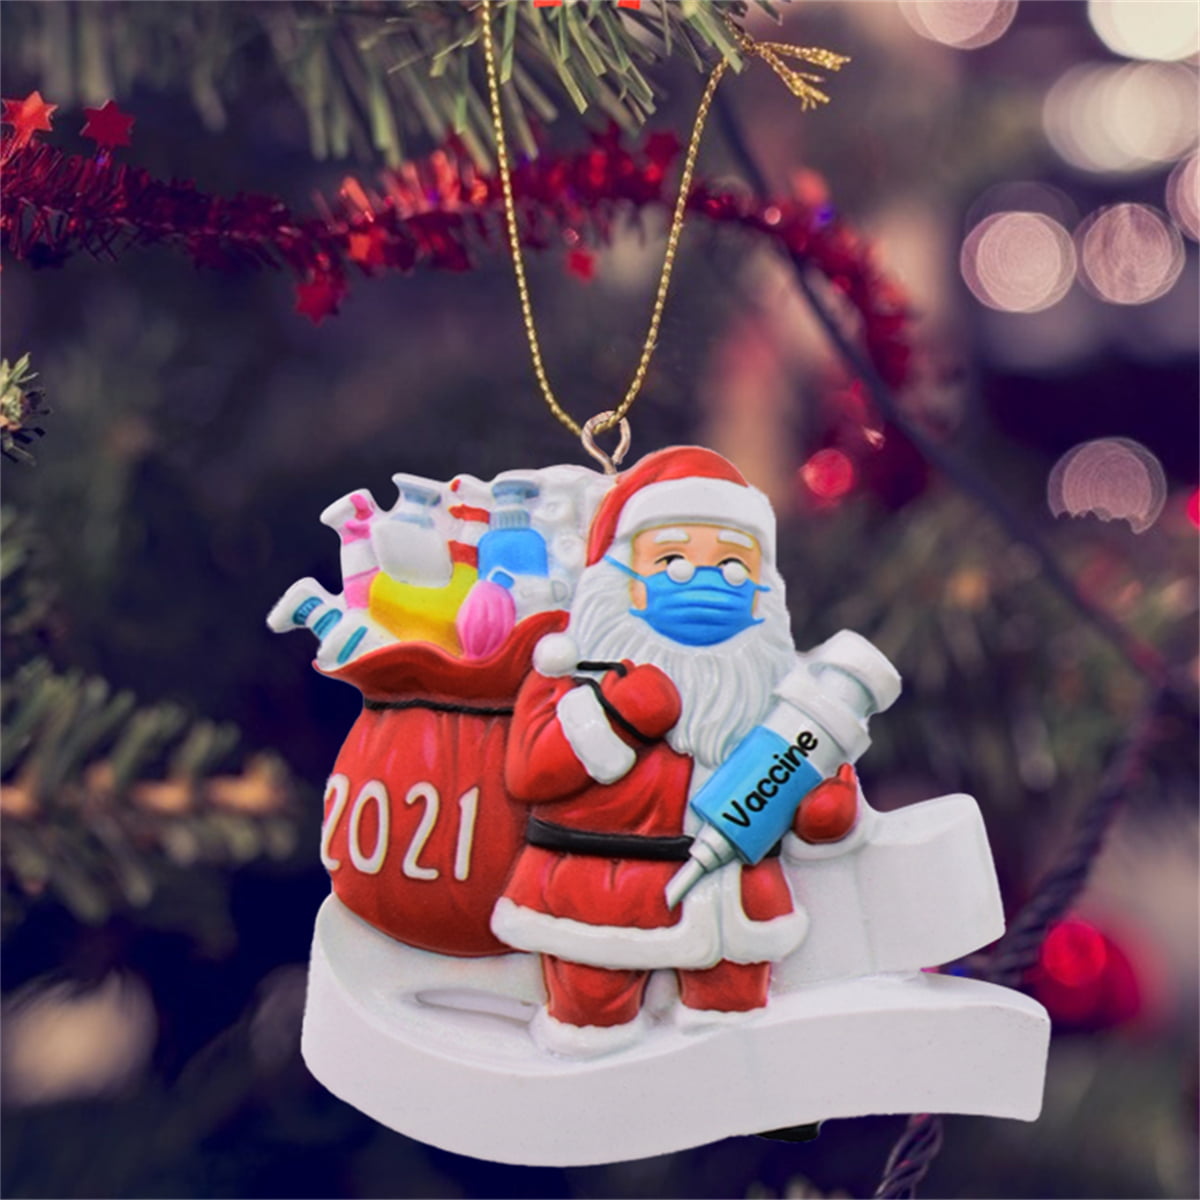 Red and White Christmas Ornaments with Gift Box Good Luck 2021 COVID Ceramic Hanging Ornament for Christmas Tree Decoration Good Luck 2021 Face Mask Quarantine Christmas Ornament